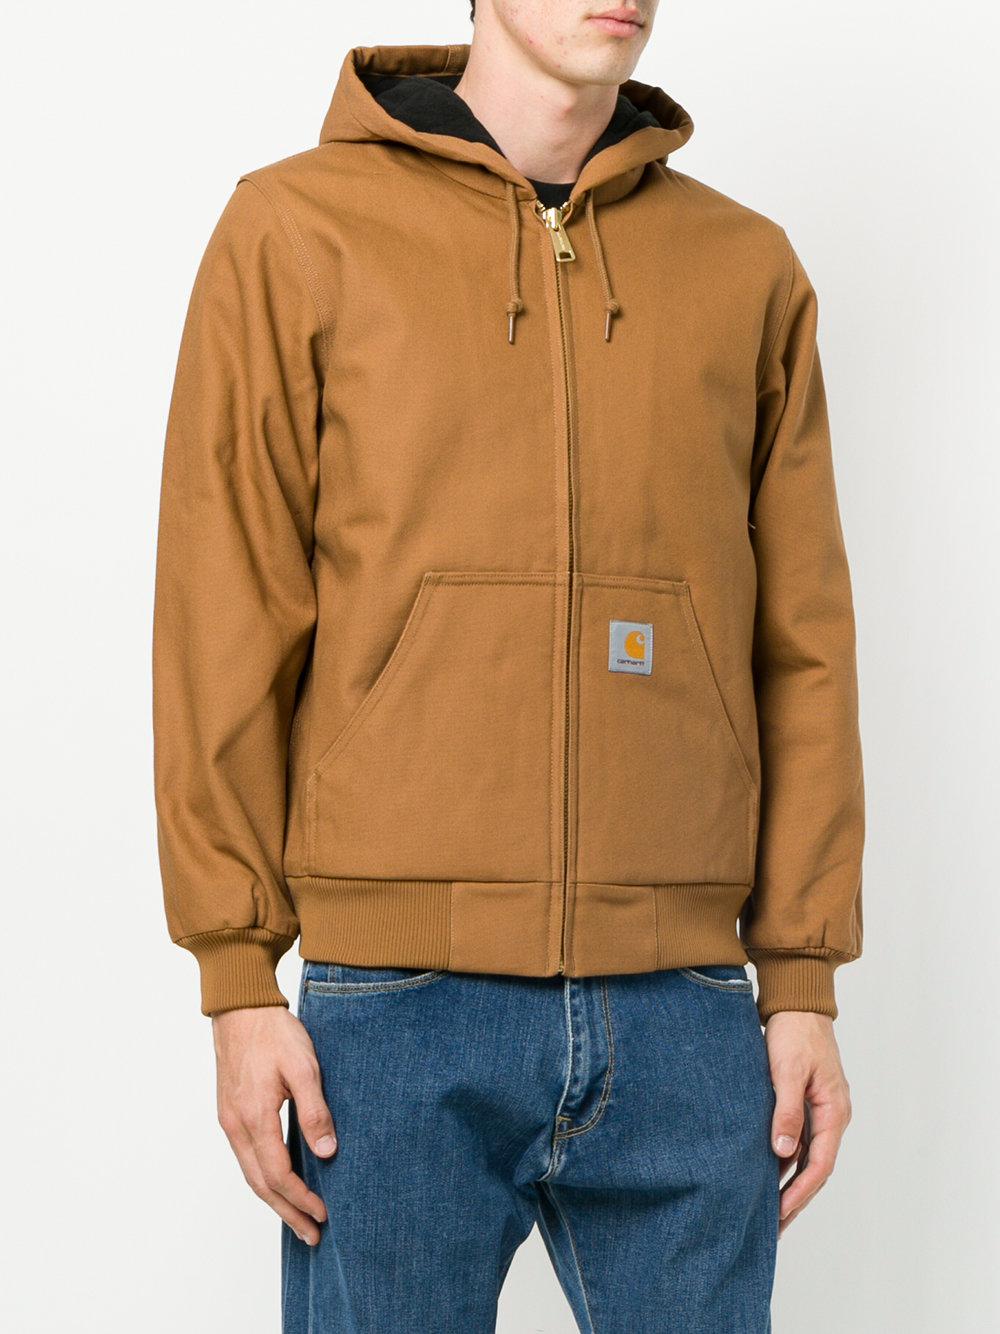 Carhartt Cotton Zipped Hooded Jacket in Brown for Men - Lyst